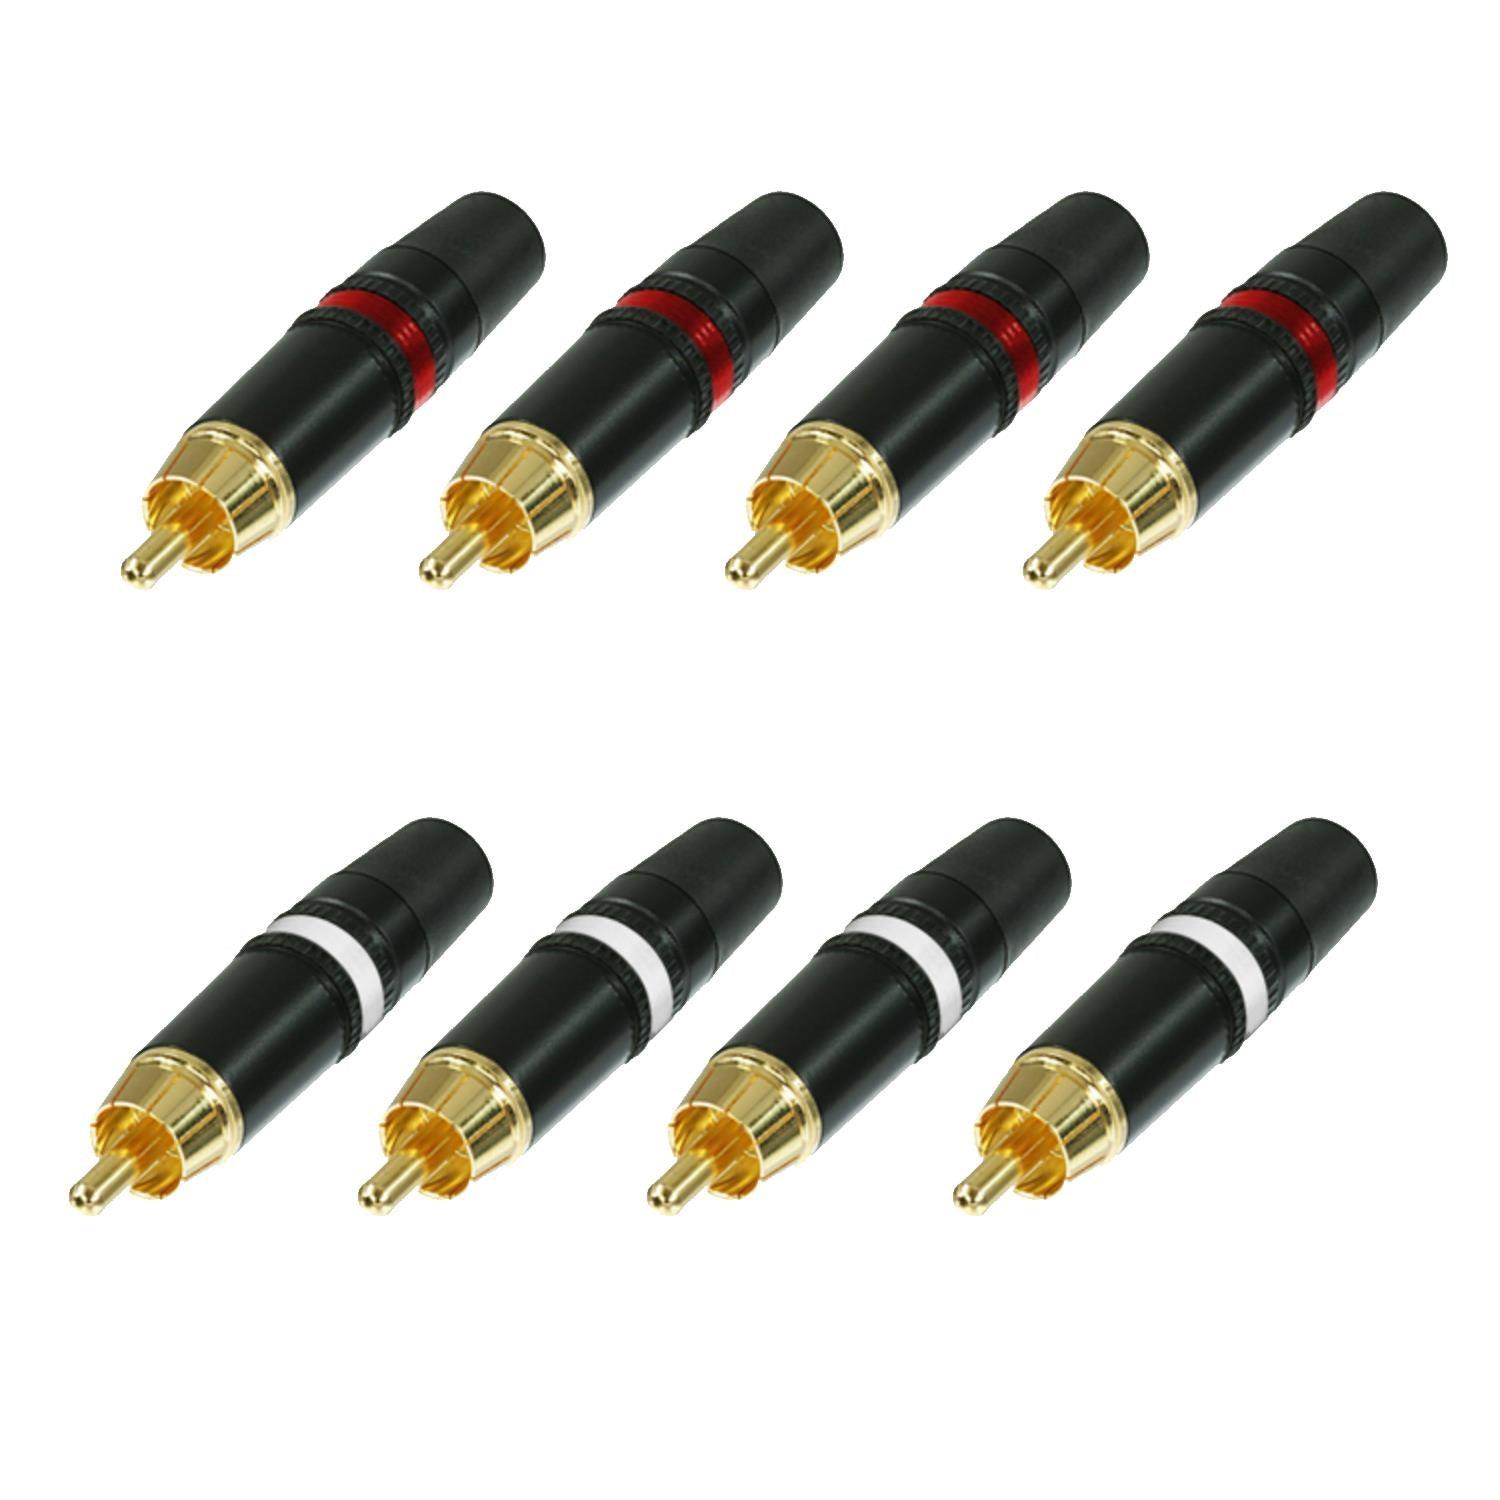 8 x Neutrik NYS373 Red & White Phono Plug with Gold Plated Contacts - DY Pro Audio